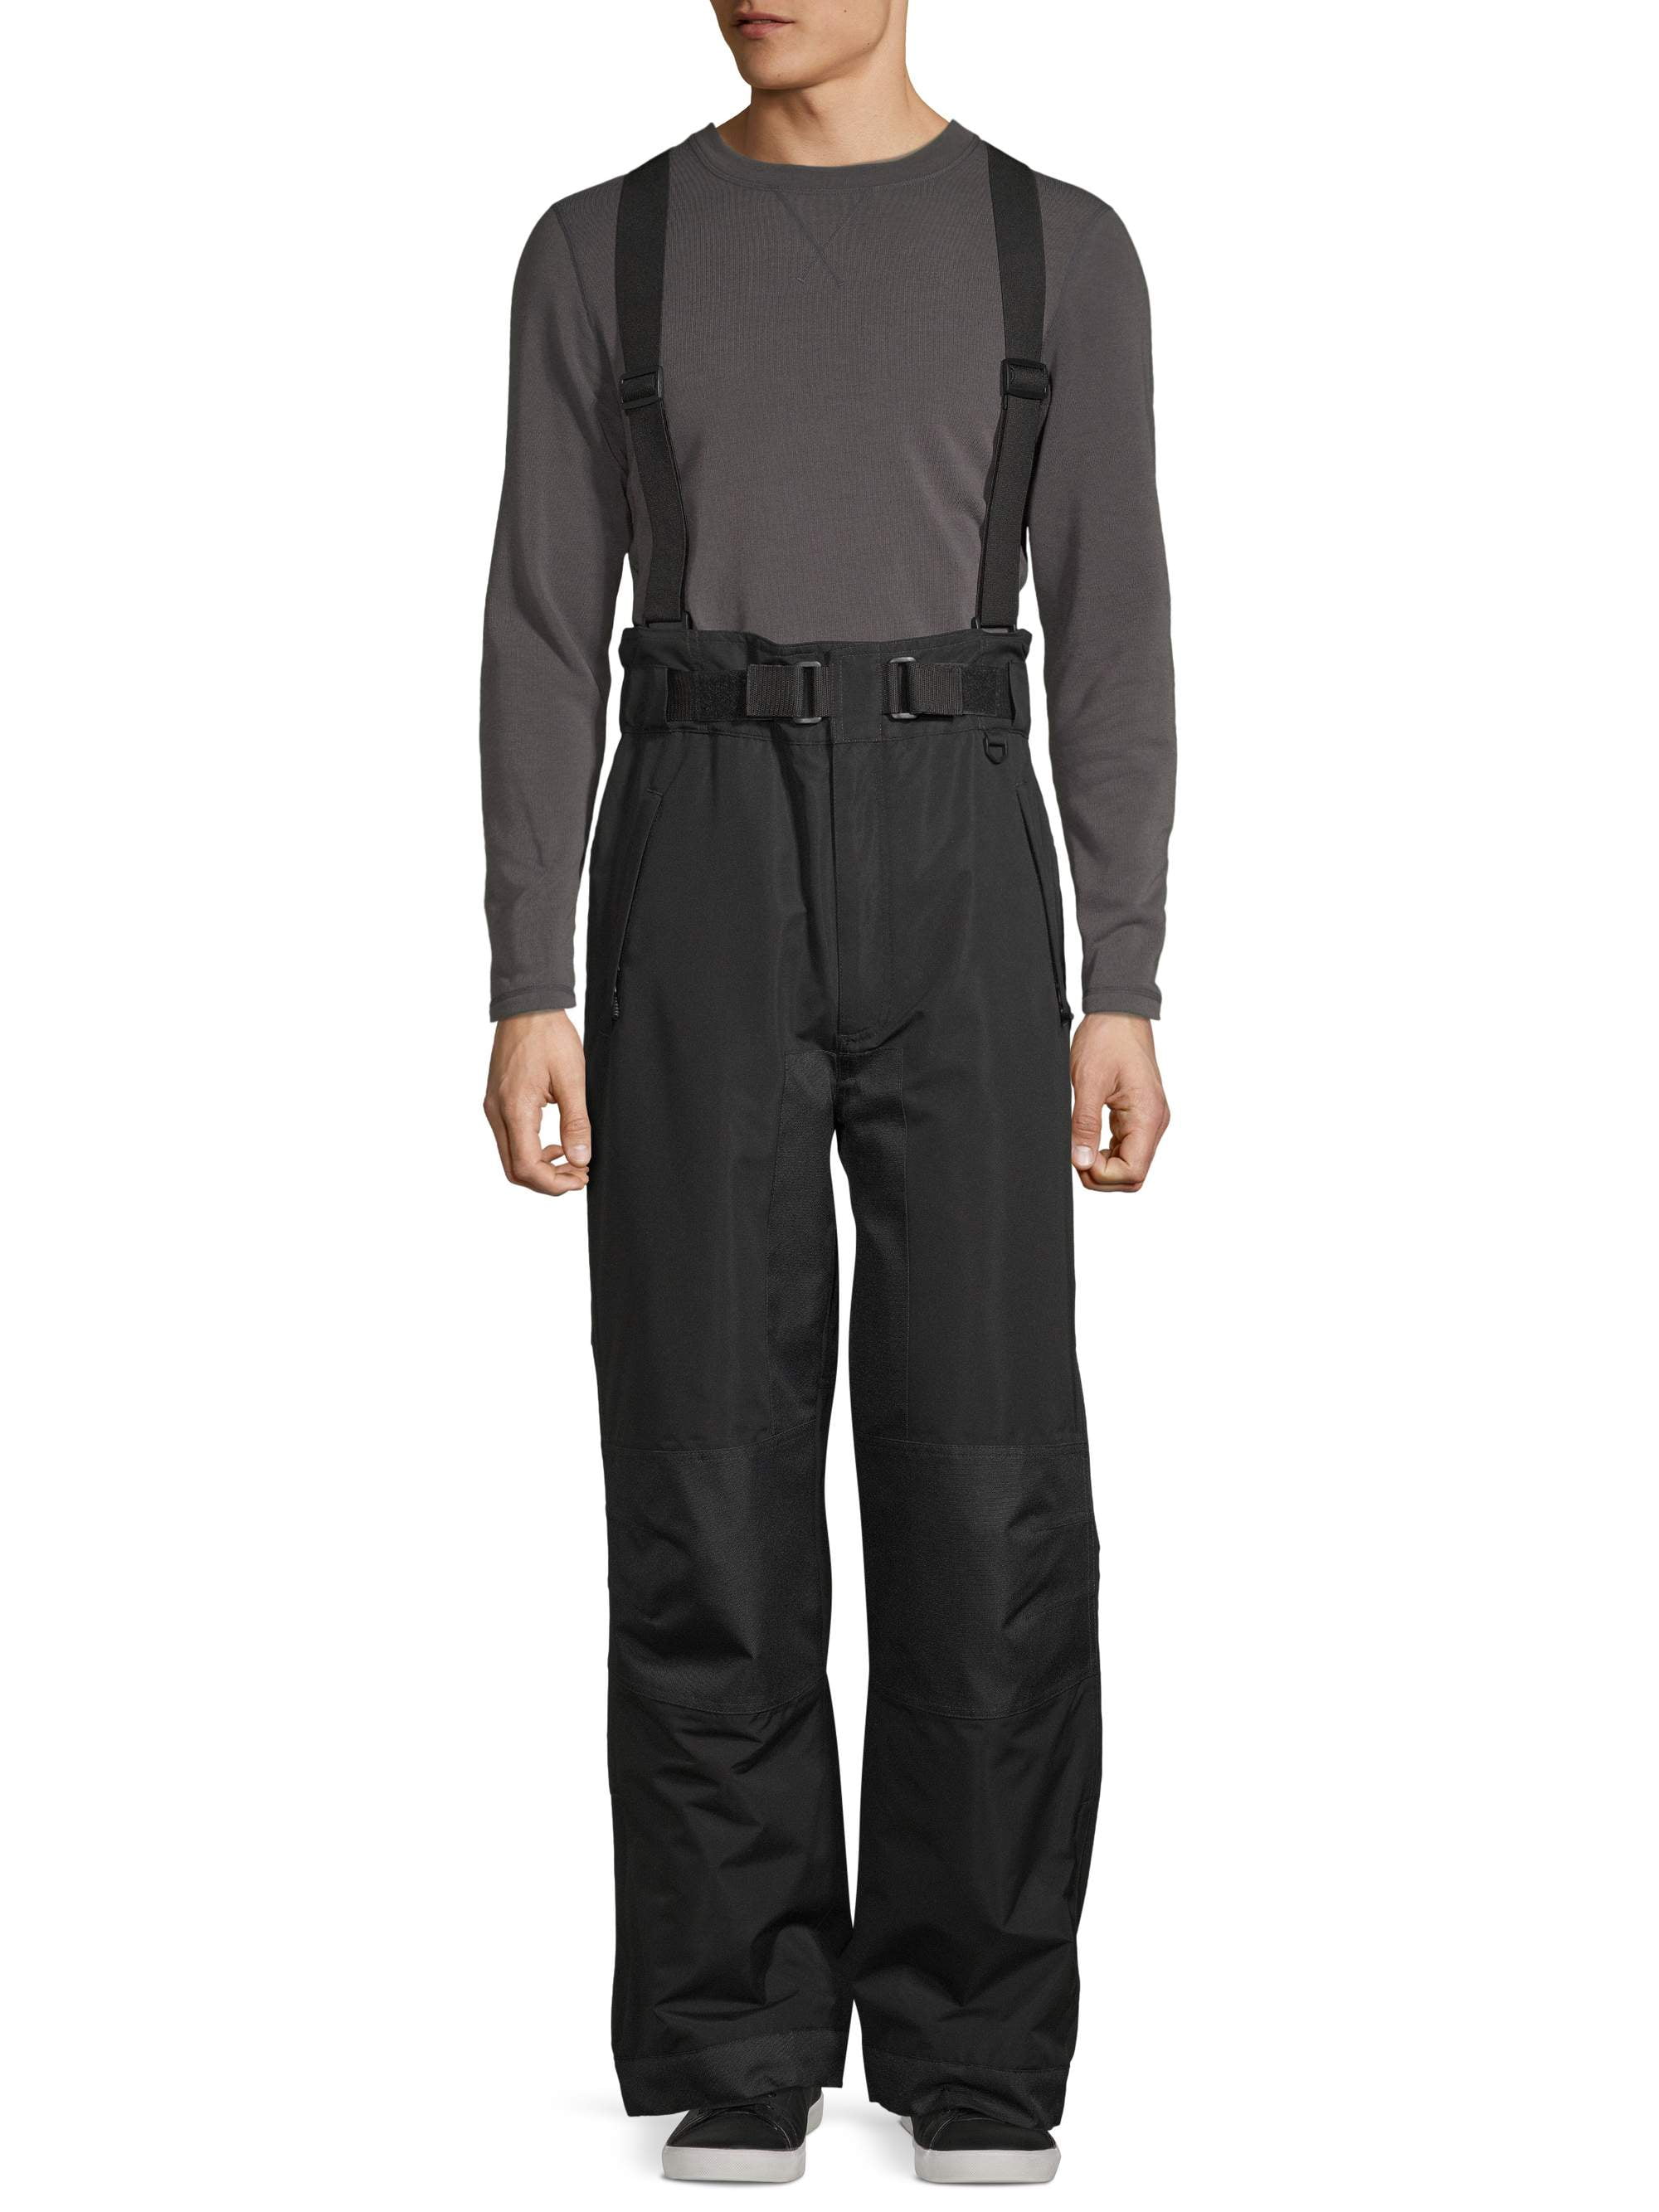 Iceburg Men's Suspended Convertible Ski Pant, up to Size 3XL - Walmart.com